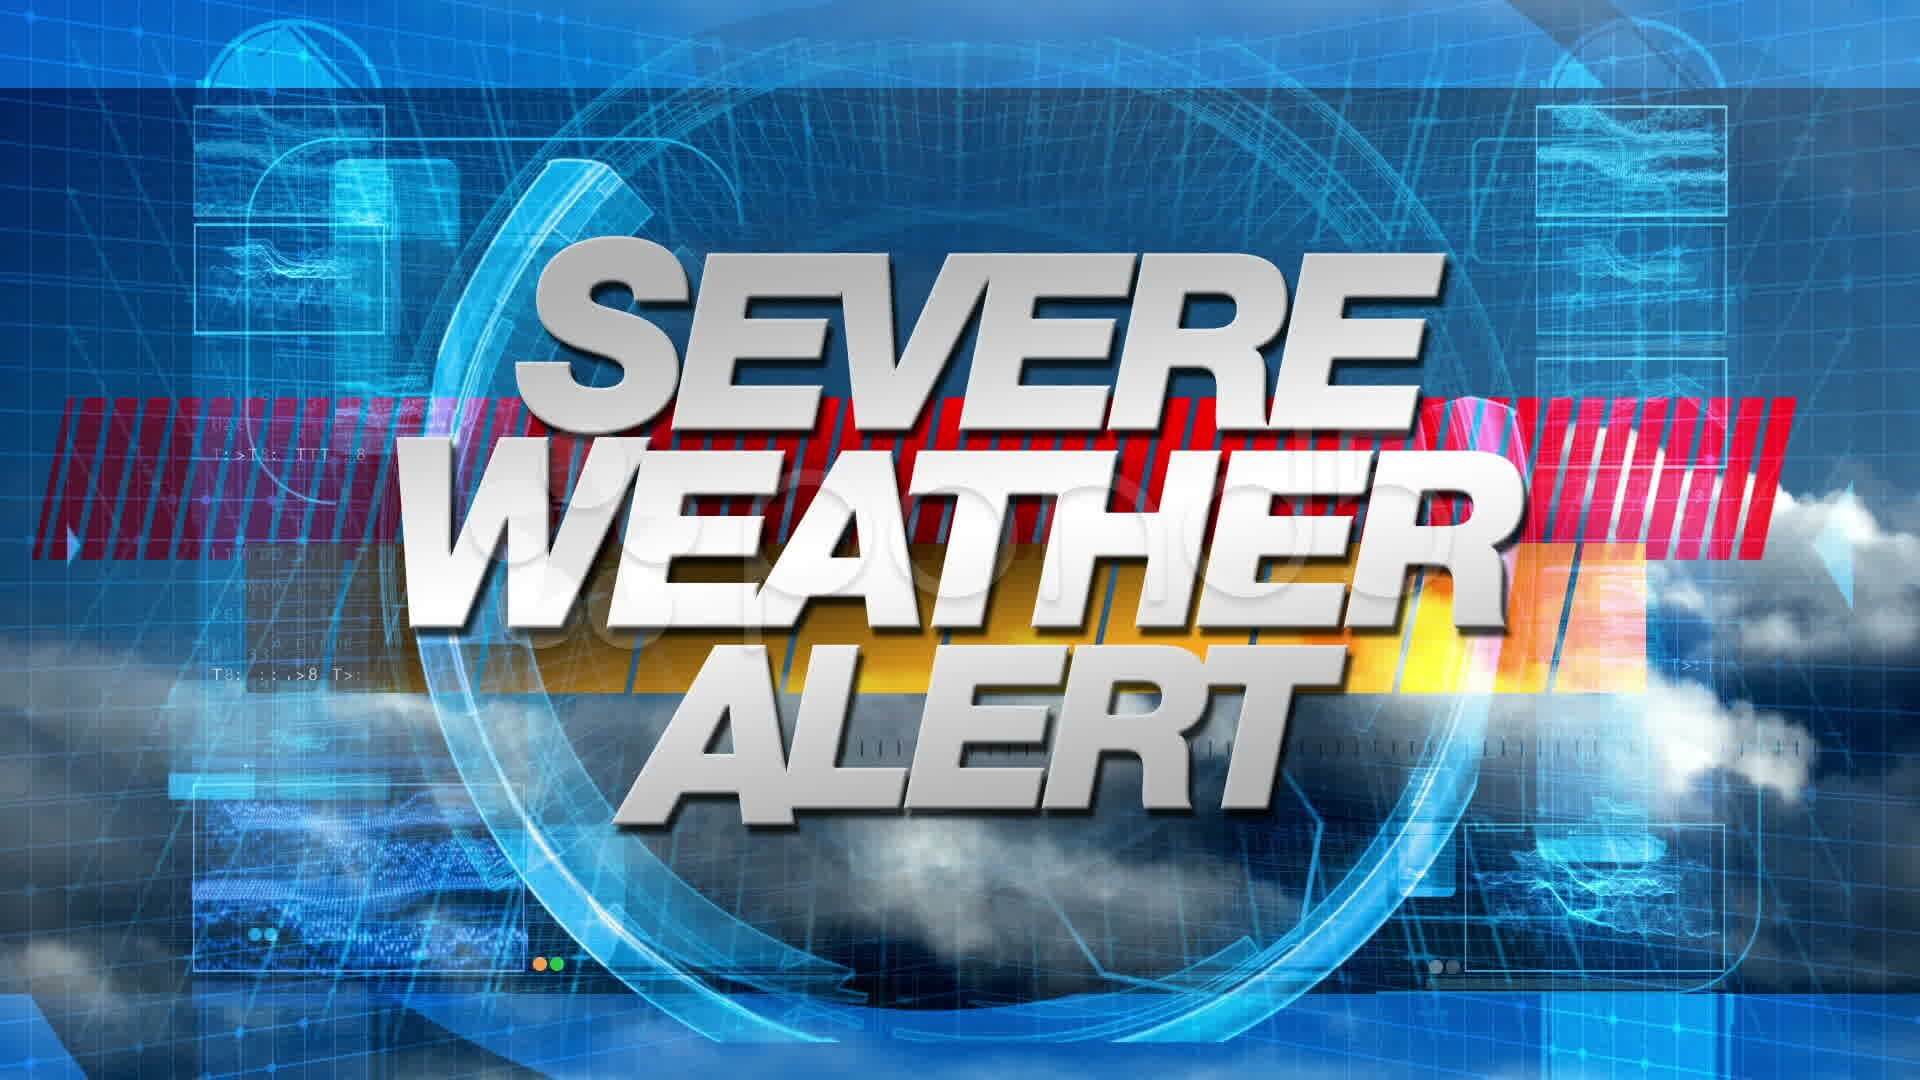 Severe thunderstorm warning issued for Tippah county and surrounding area